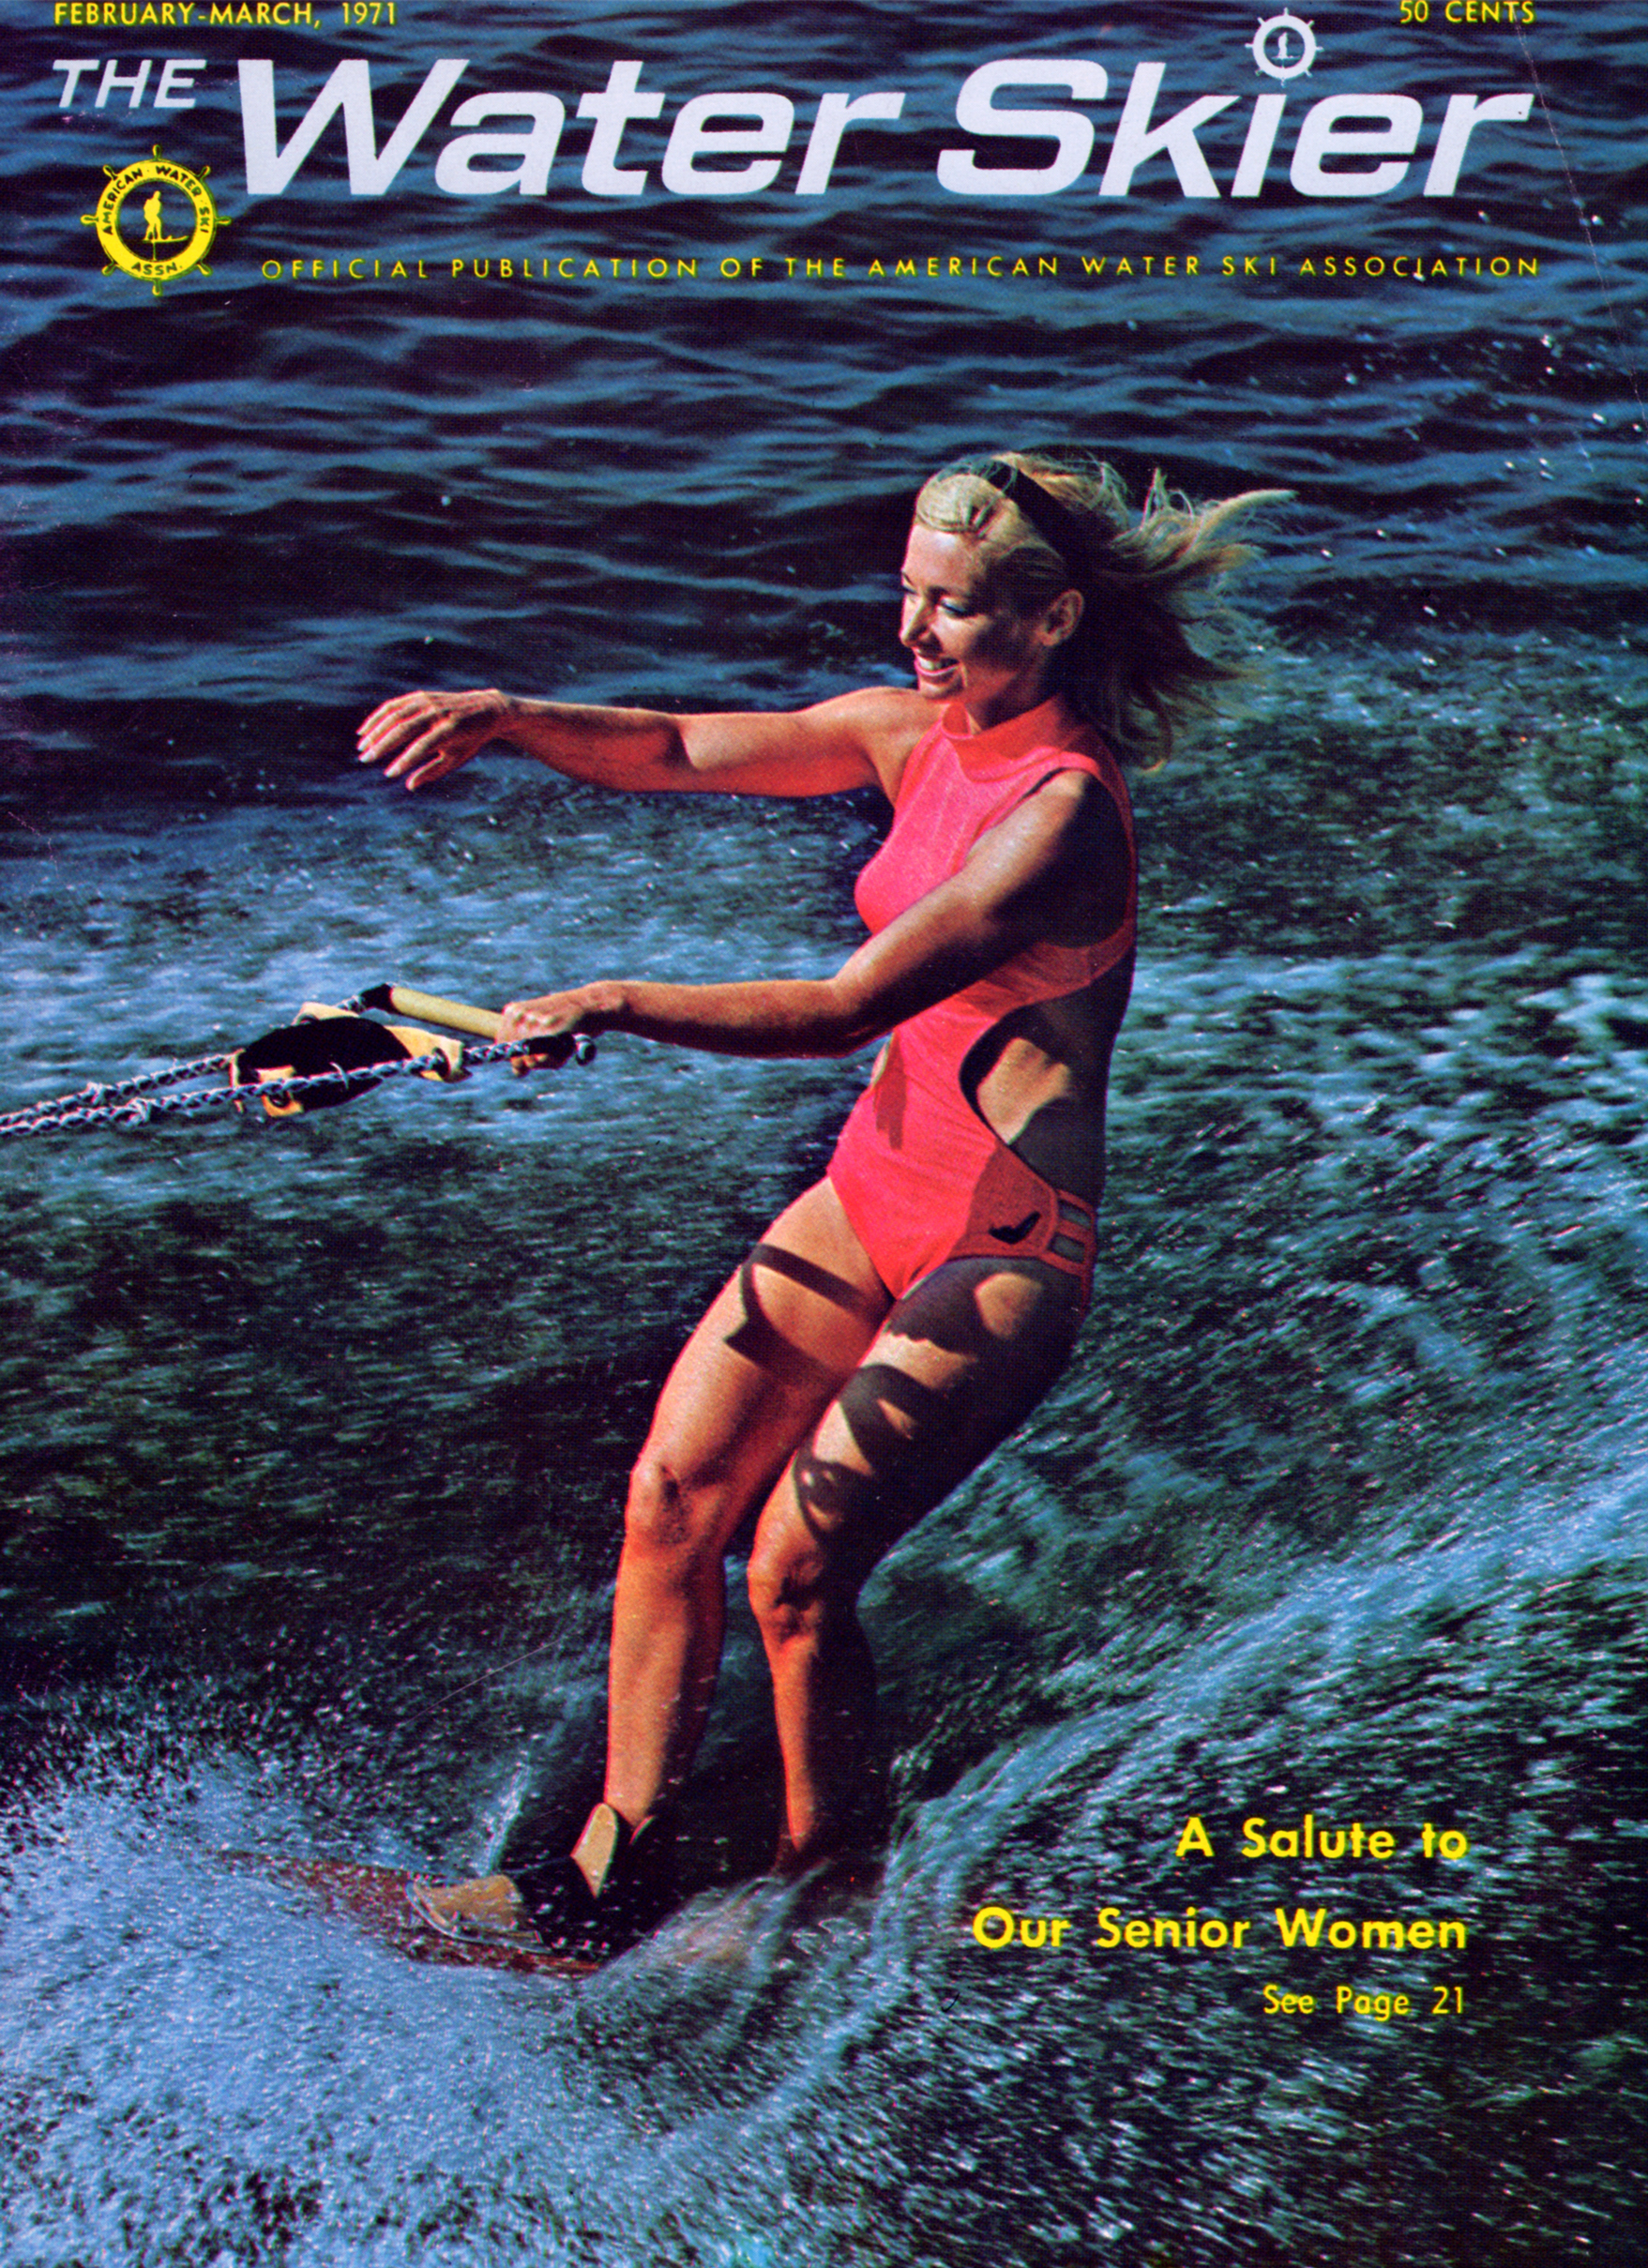 Artis Price on the cover of The Water Skier - Feb-March issue, 1971, used with permission